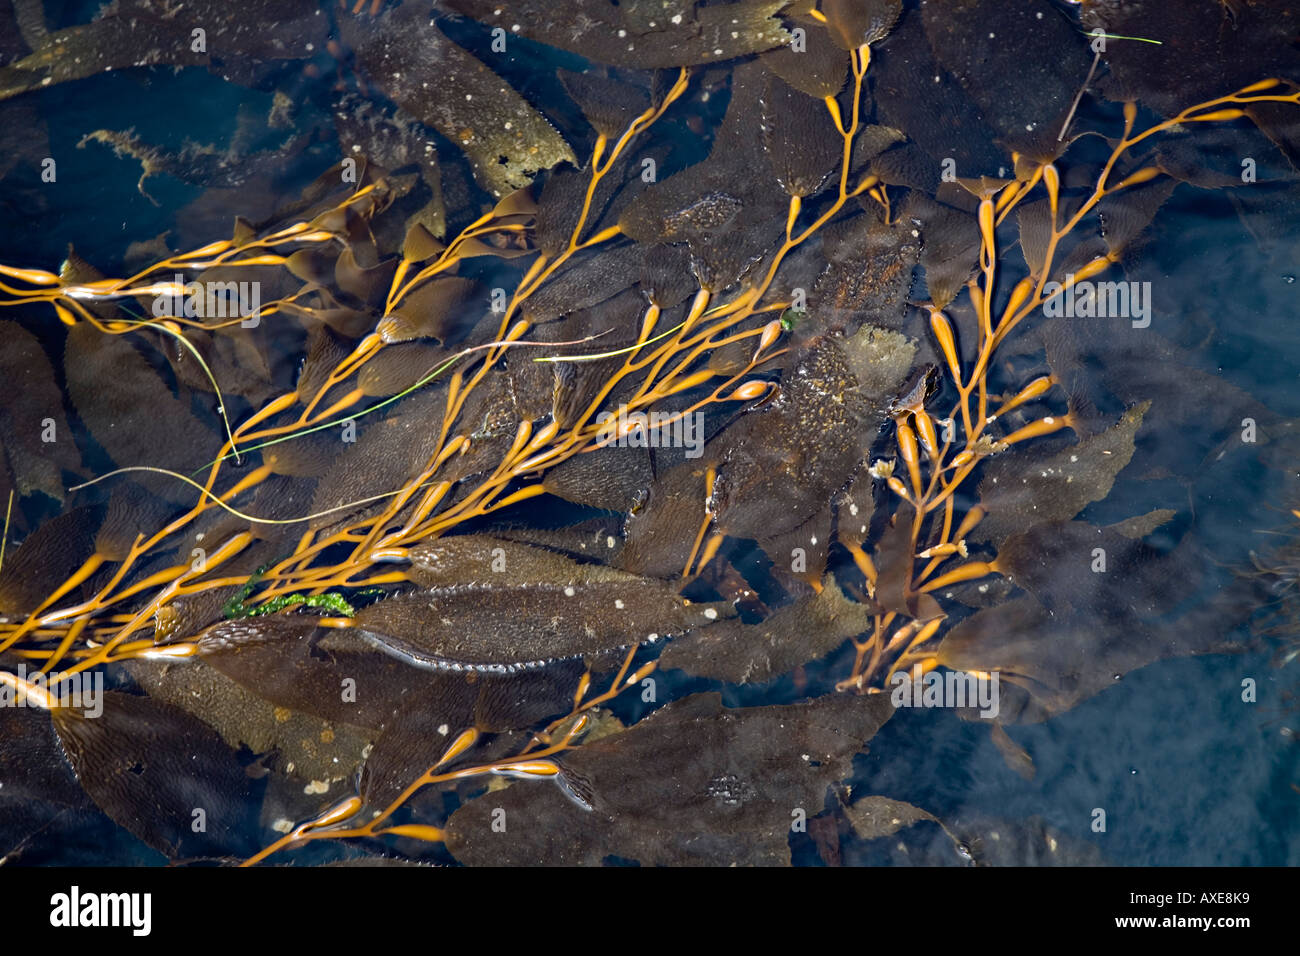 Seaweed on surface of water Vancouver island west coast Canada Stock Photo